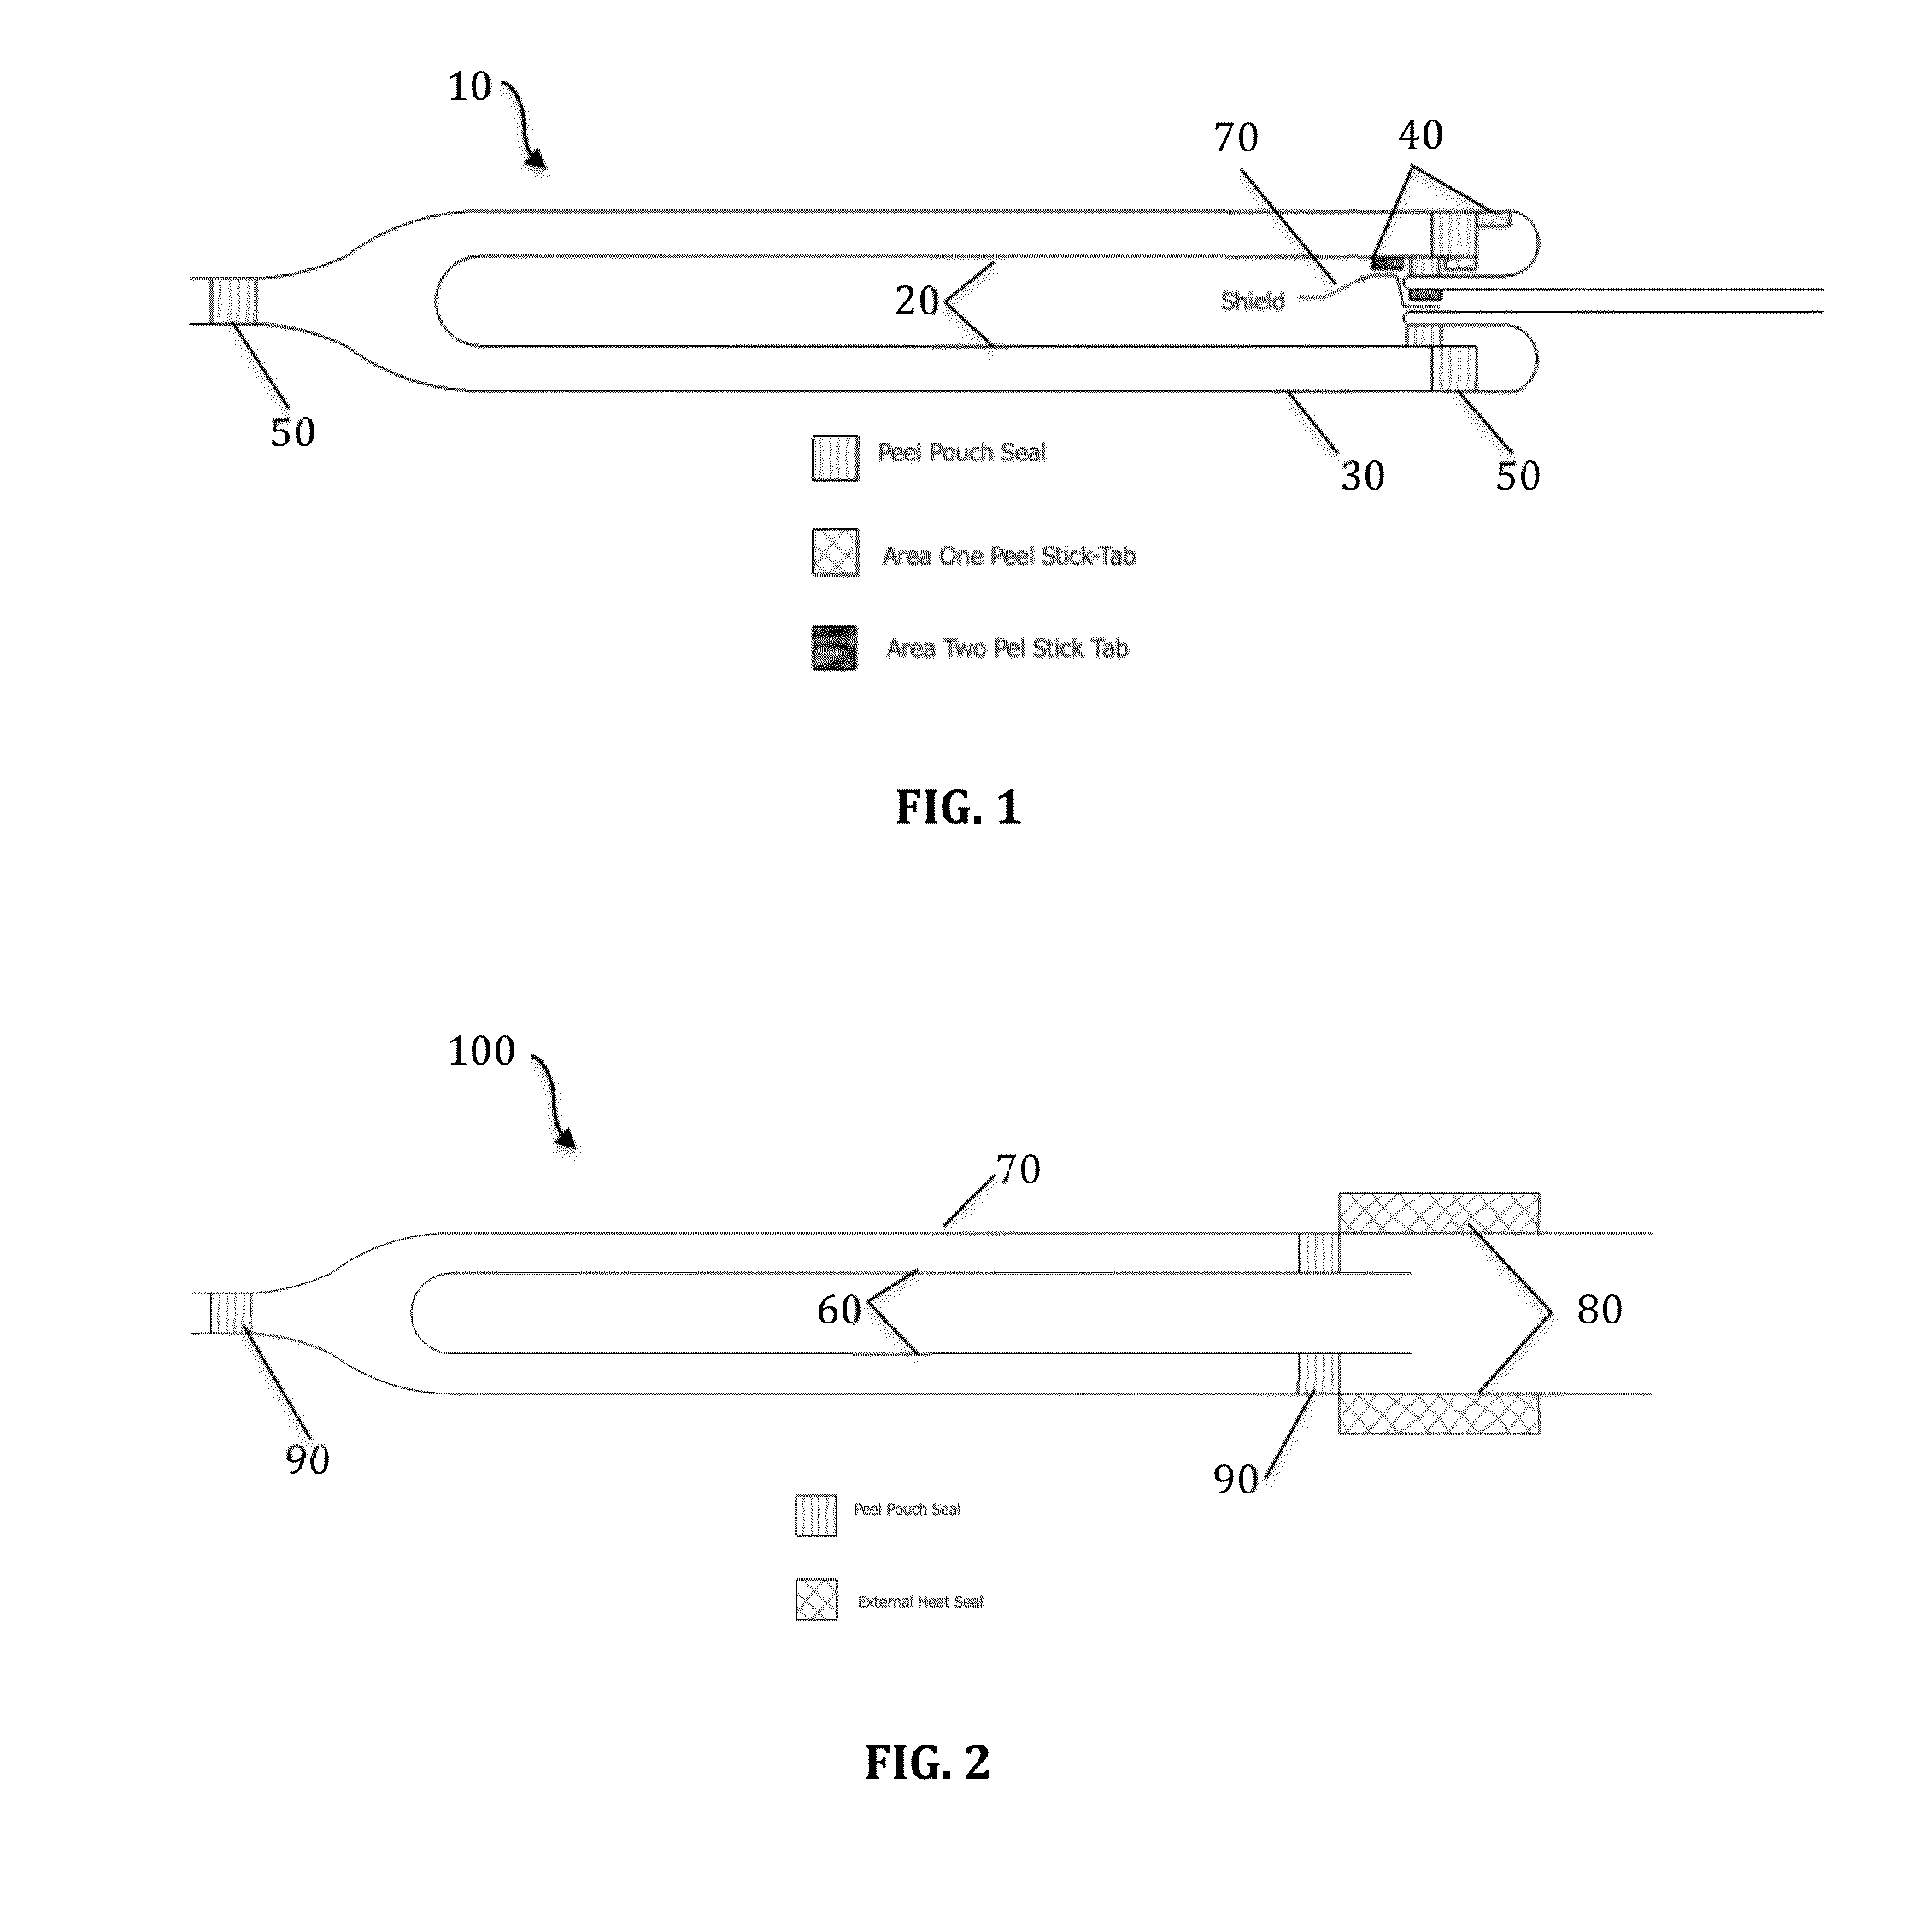 Dual Sterile Pouch and Sealing Mechanisms for the Containment of a Non-Sterile Device